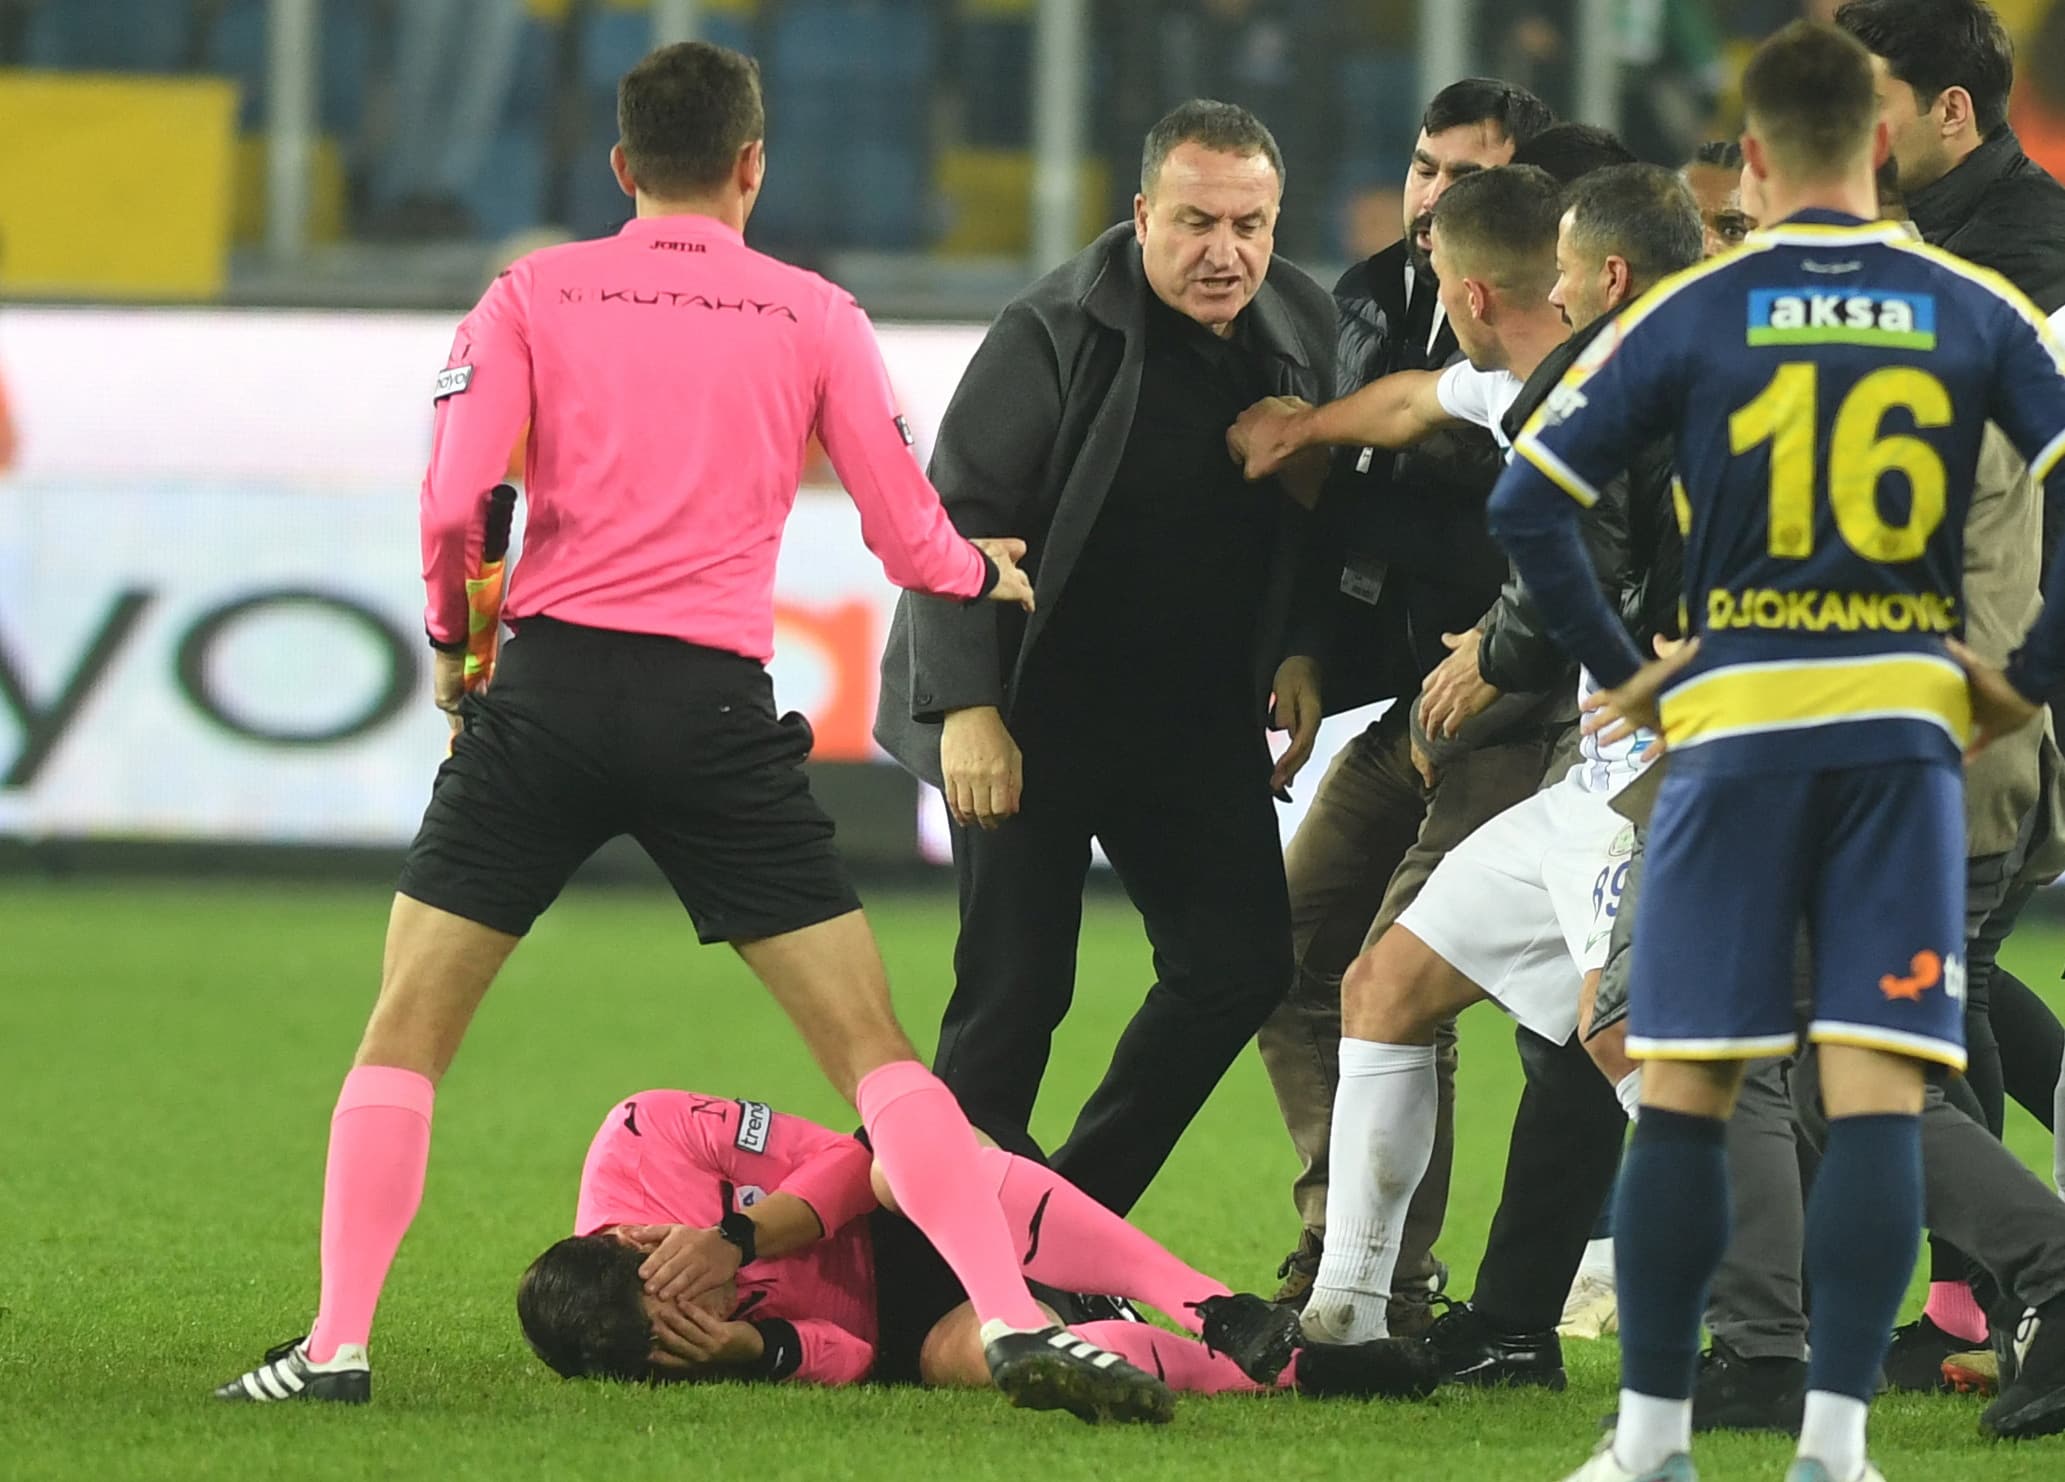 Turkey's Istanbulspor walk off pitch in protest at referee's decision - Cyprus Mail